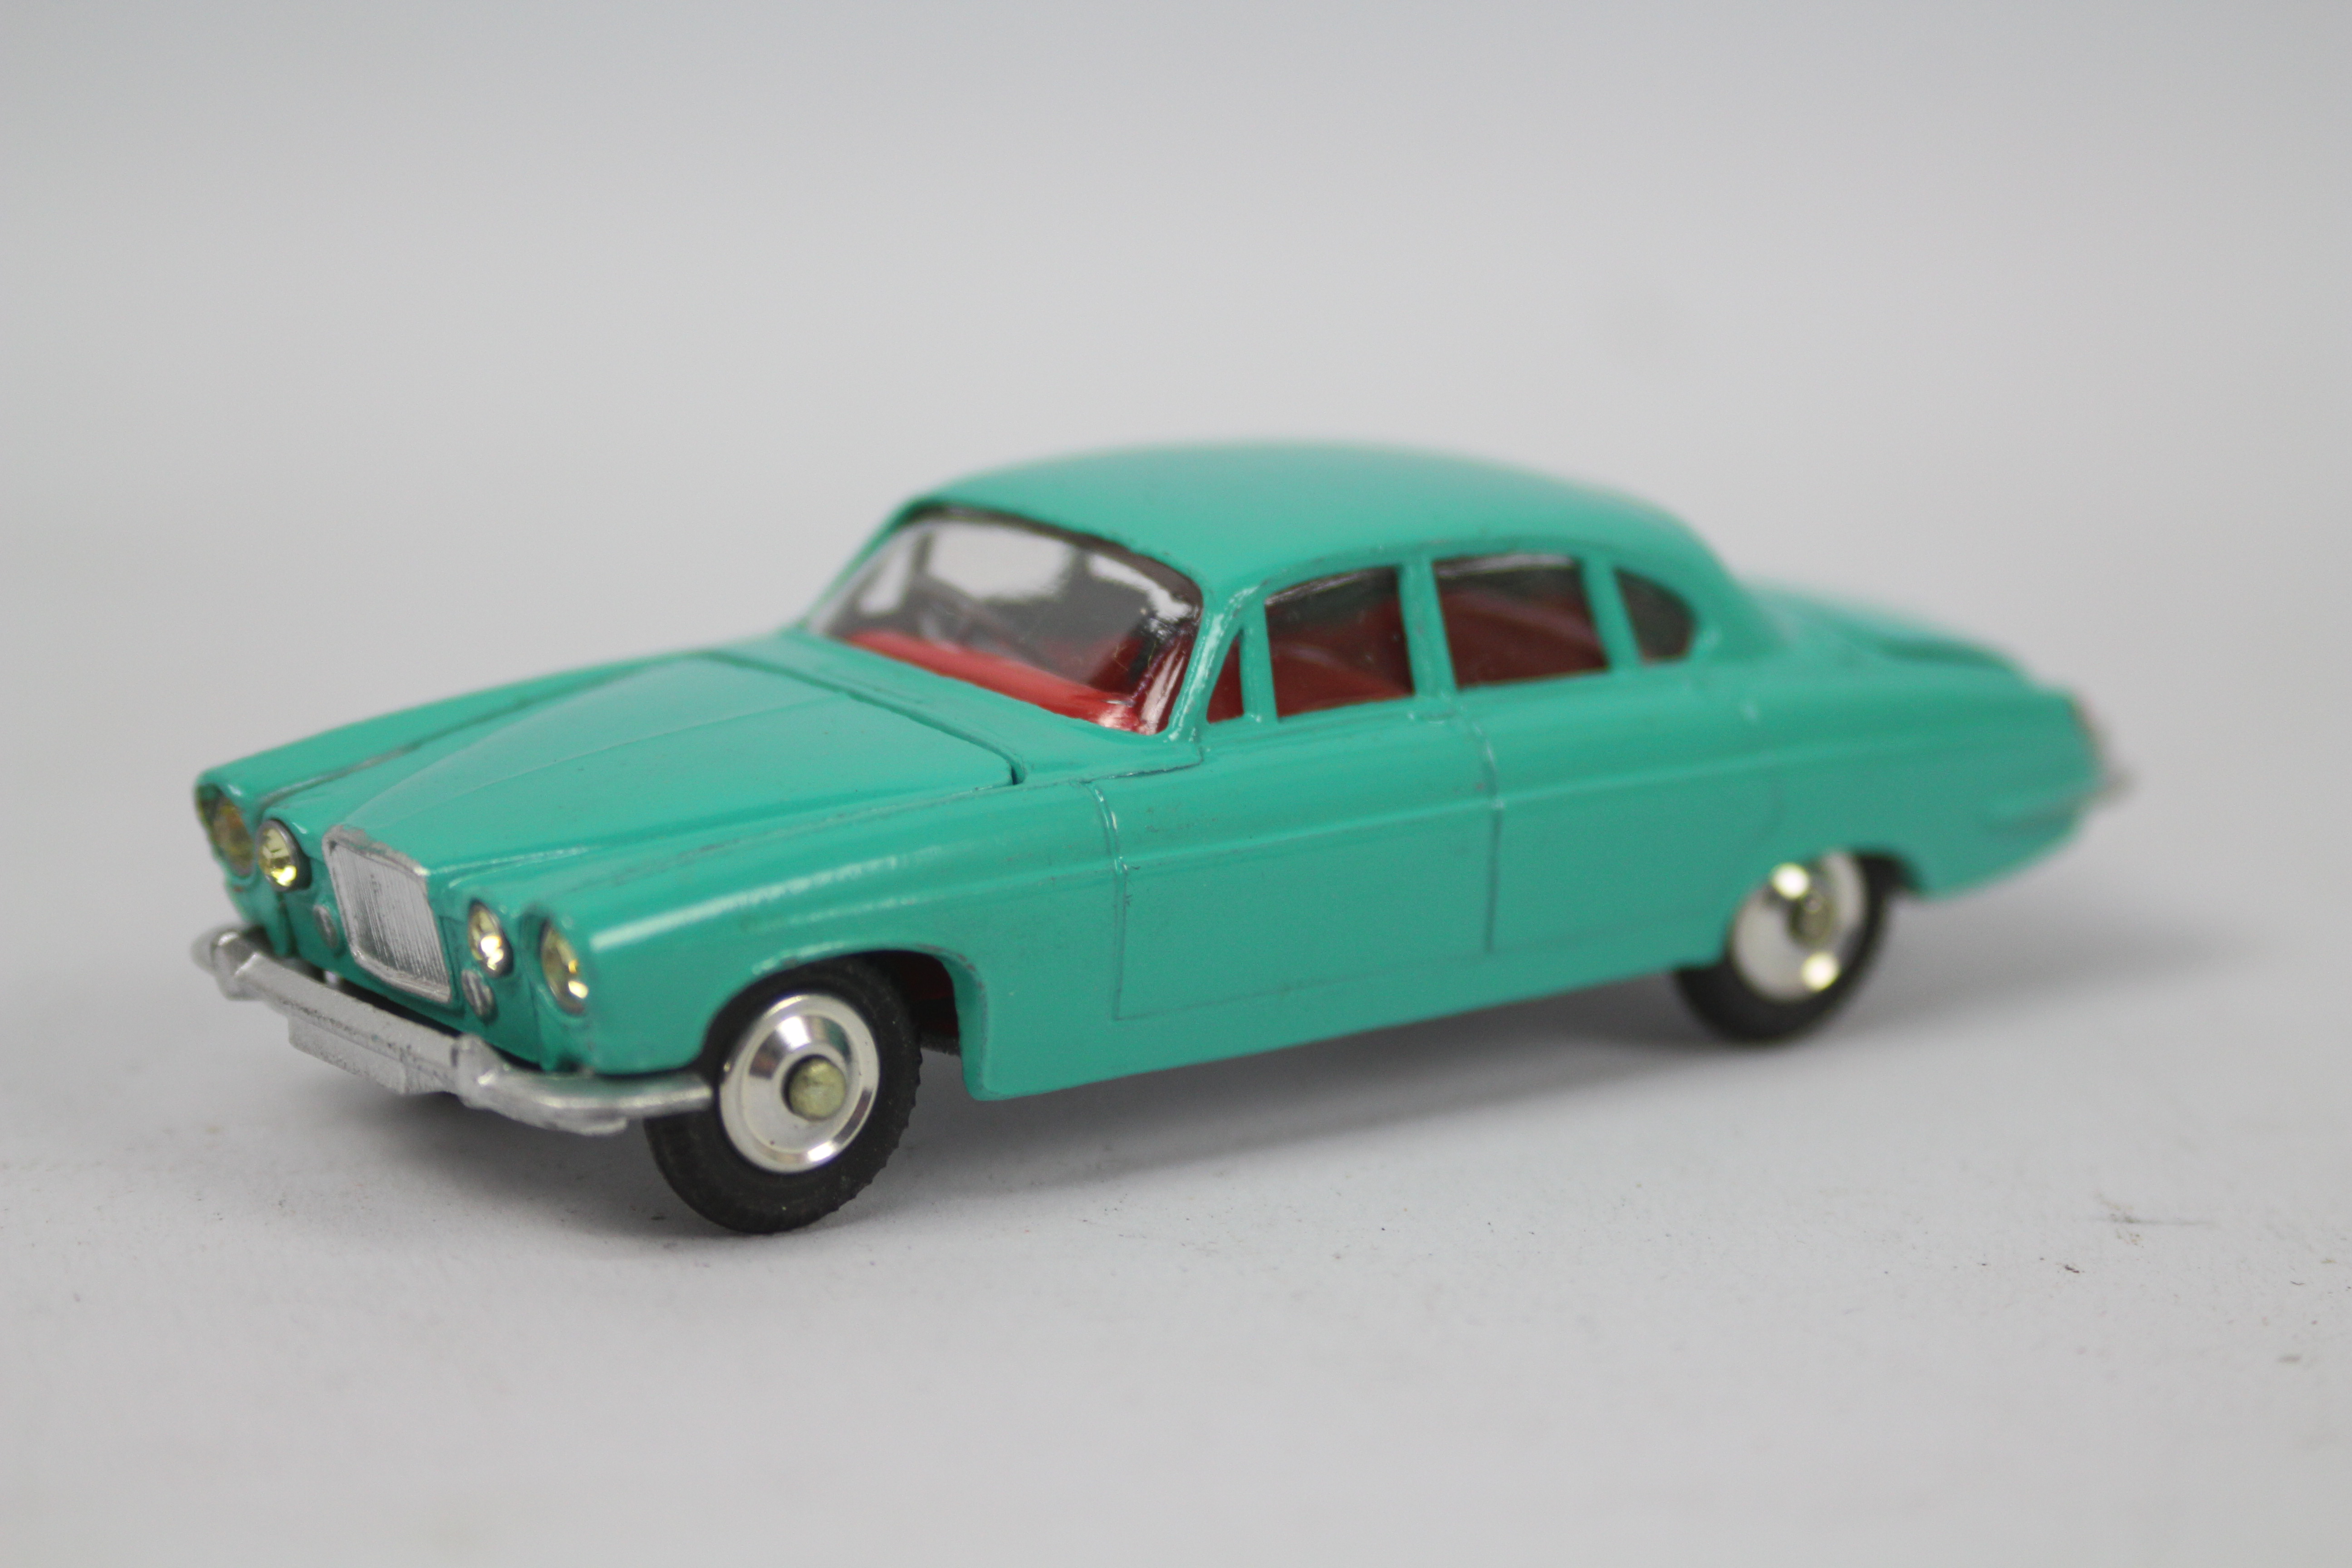 Corgi - Jaguar MkX, sea green body with red interior and spun hubs, luggage in trunk, - Image 2 of 6